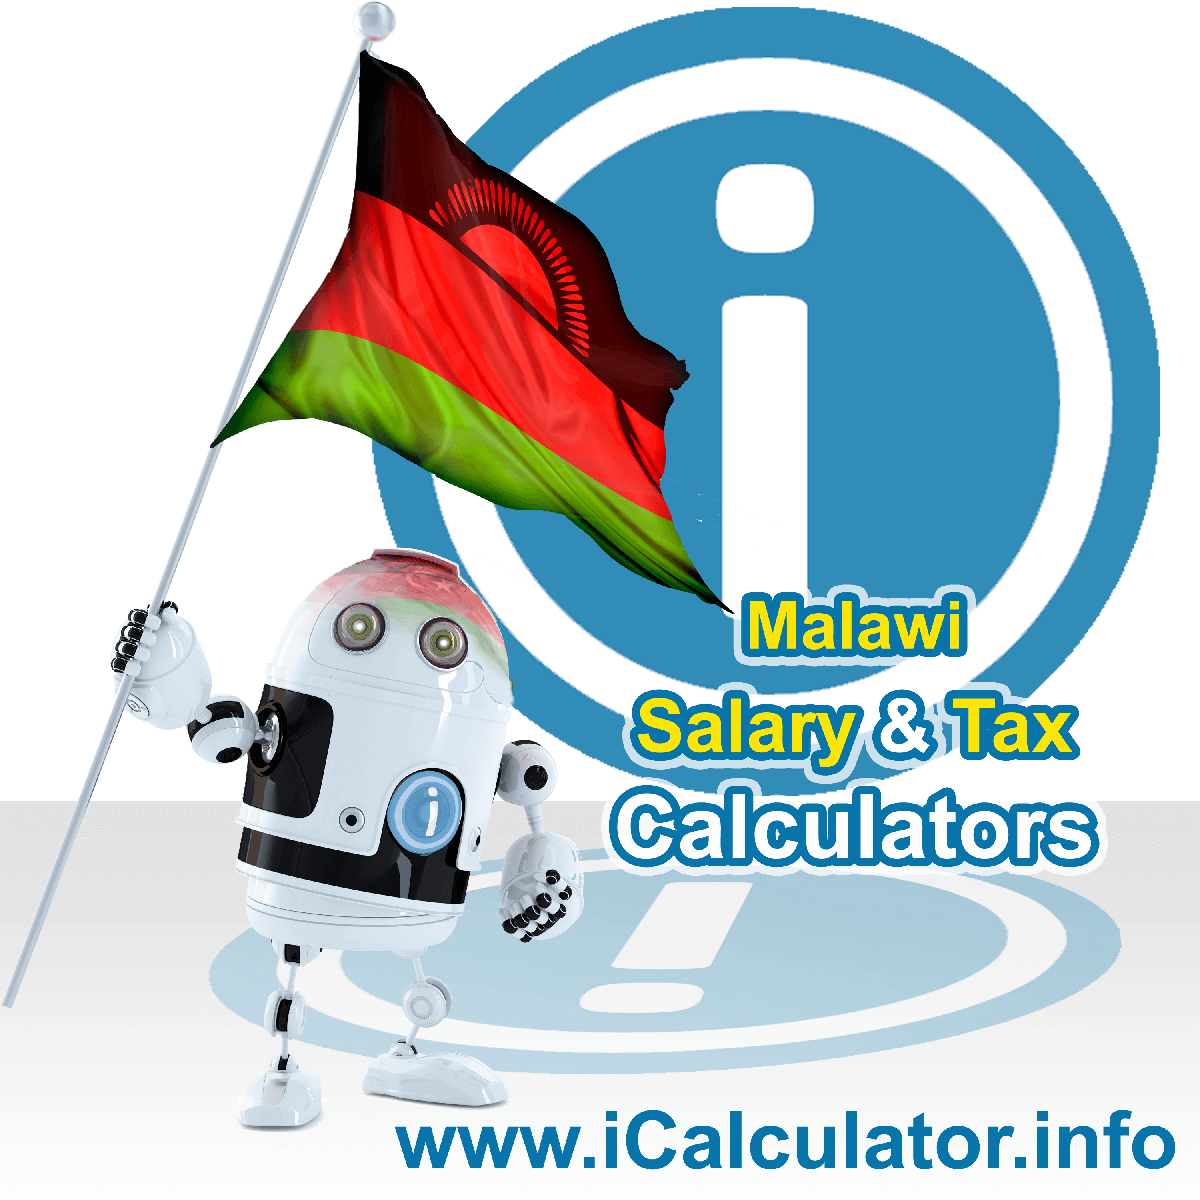 Malawi Salary Calculator. This image shows the Malawiese flag and information relating to the tax formula for the Malawi Tax Calculator